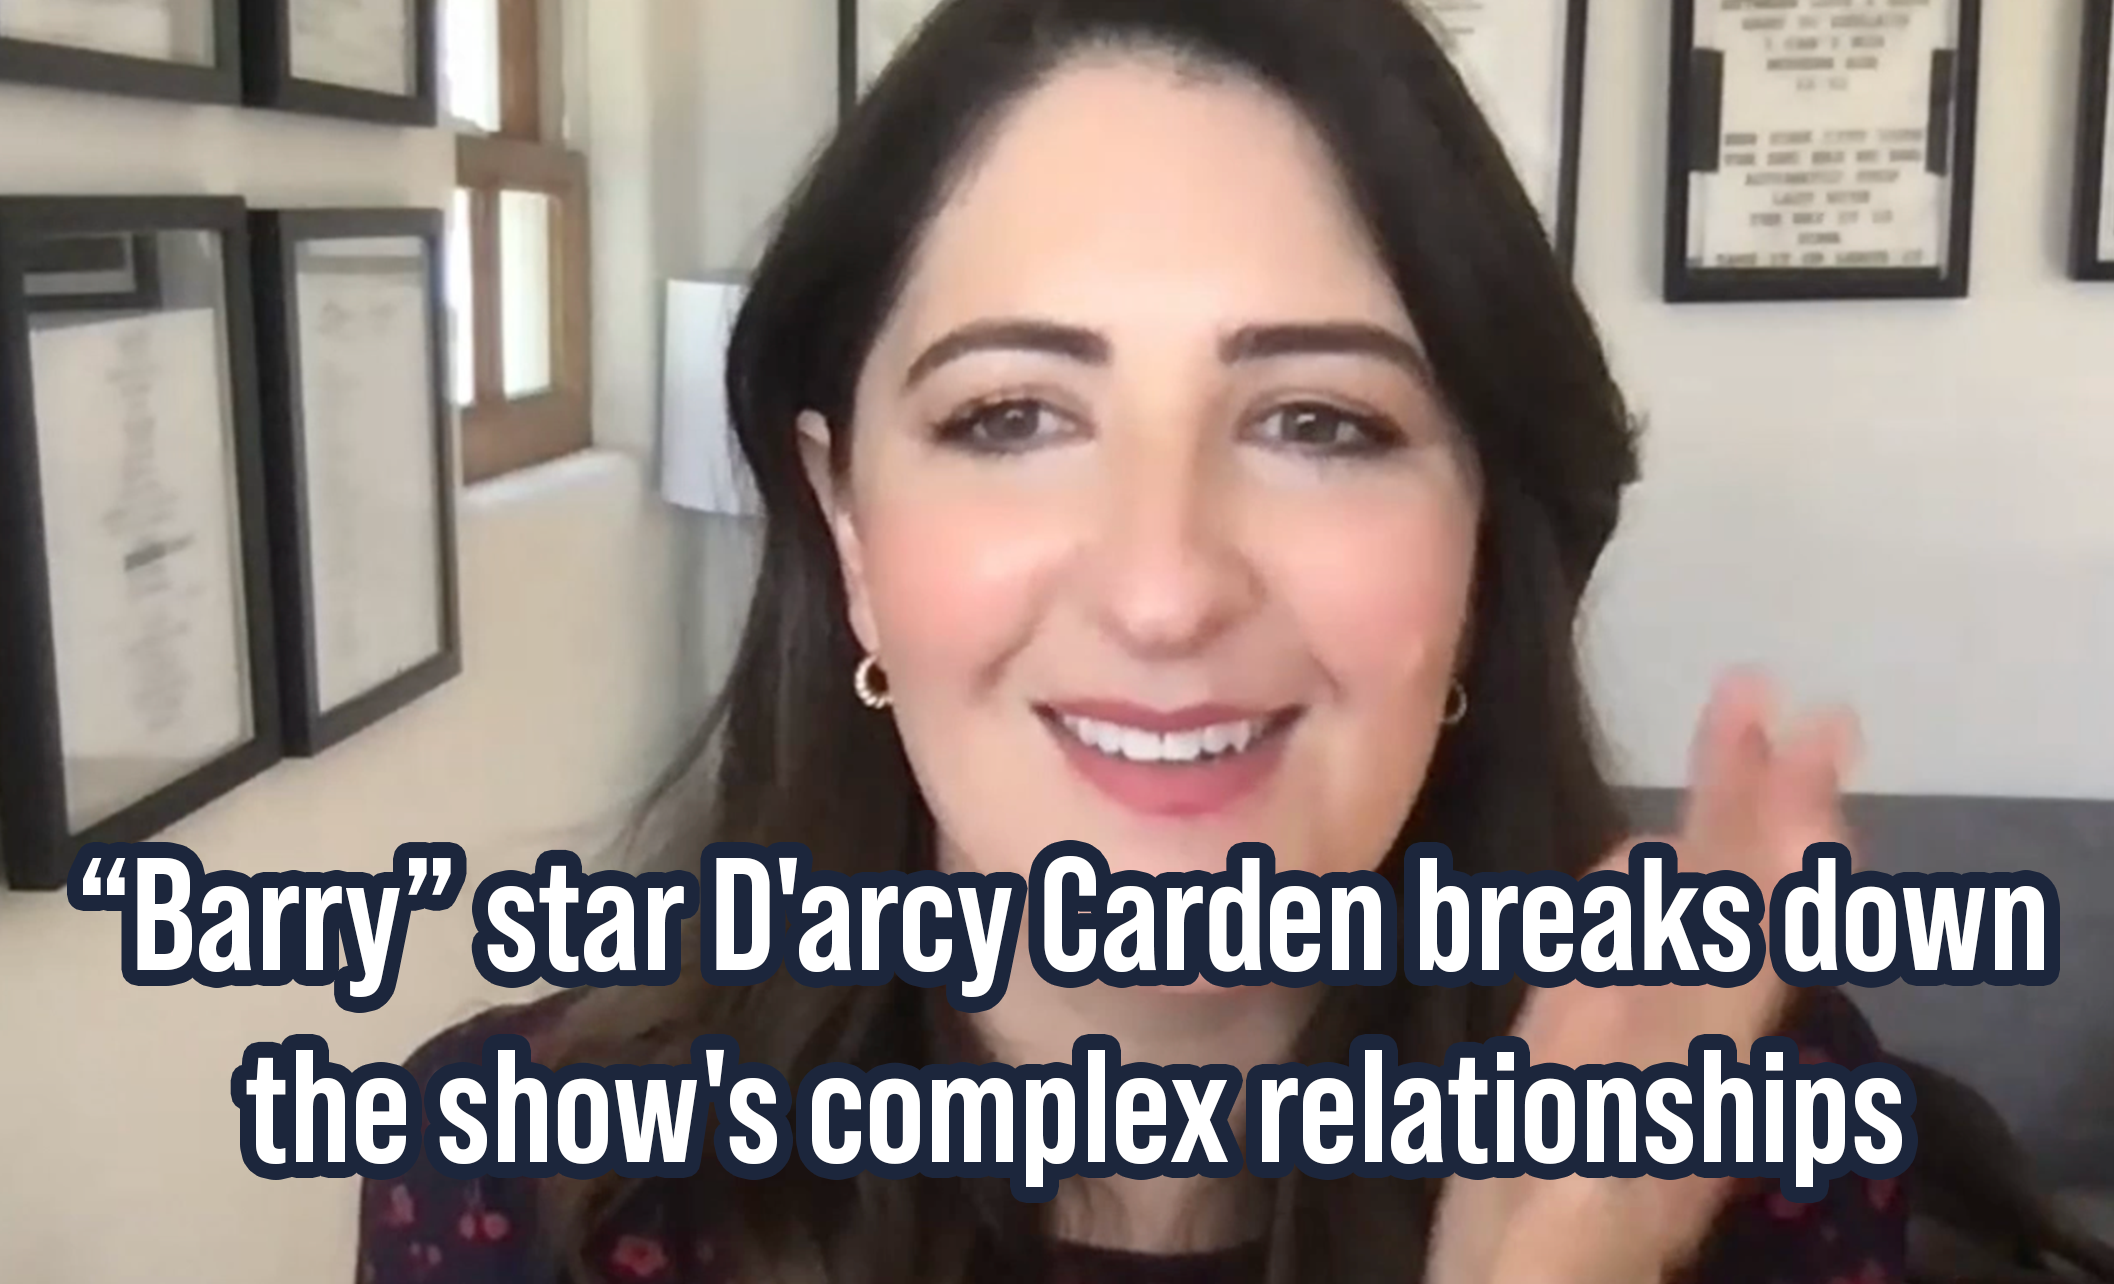 Barry star D’arcy Carden breaks down the show’s complex relationships